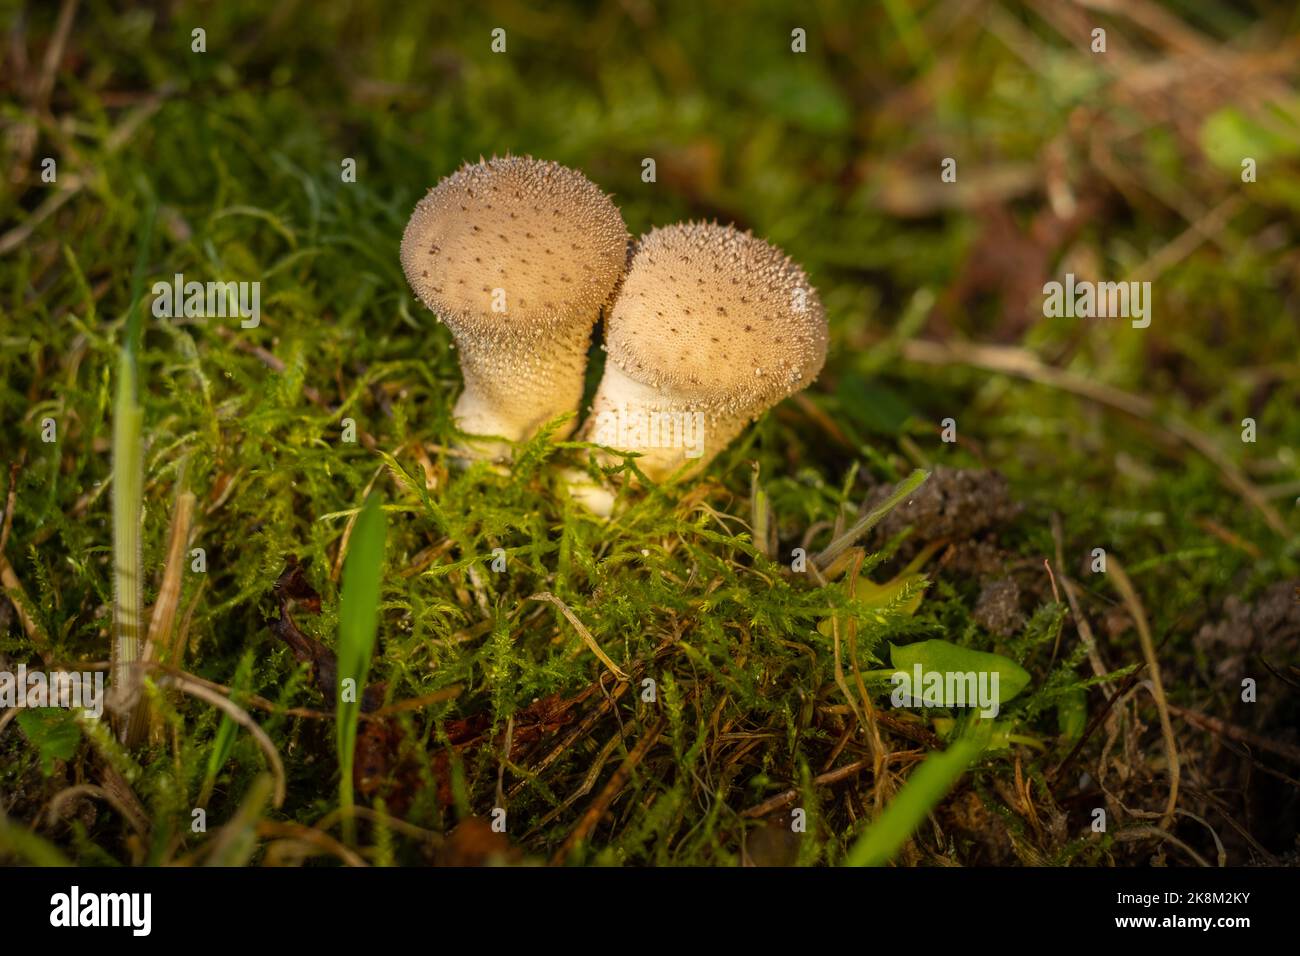 Forest fungus. Common puffball mushroom - Lycoperdon perlatum - growing in green moss in the autumn forest Stock Photo